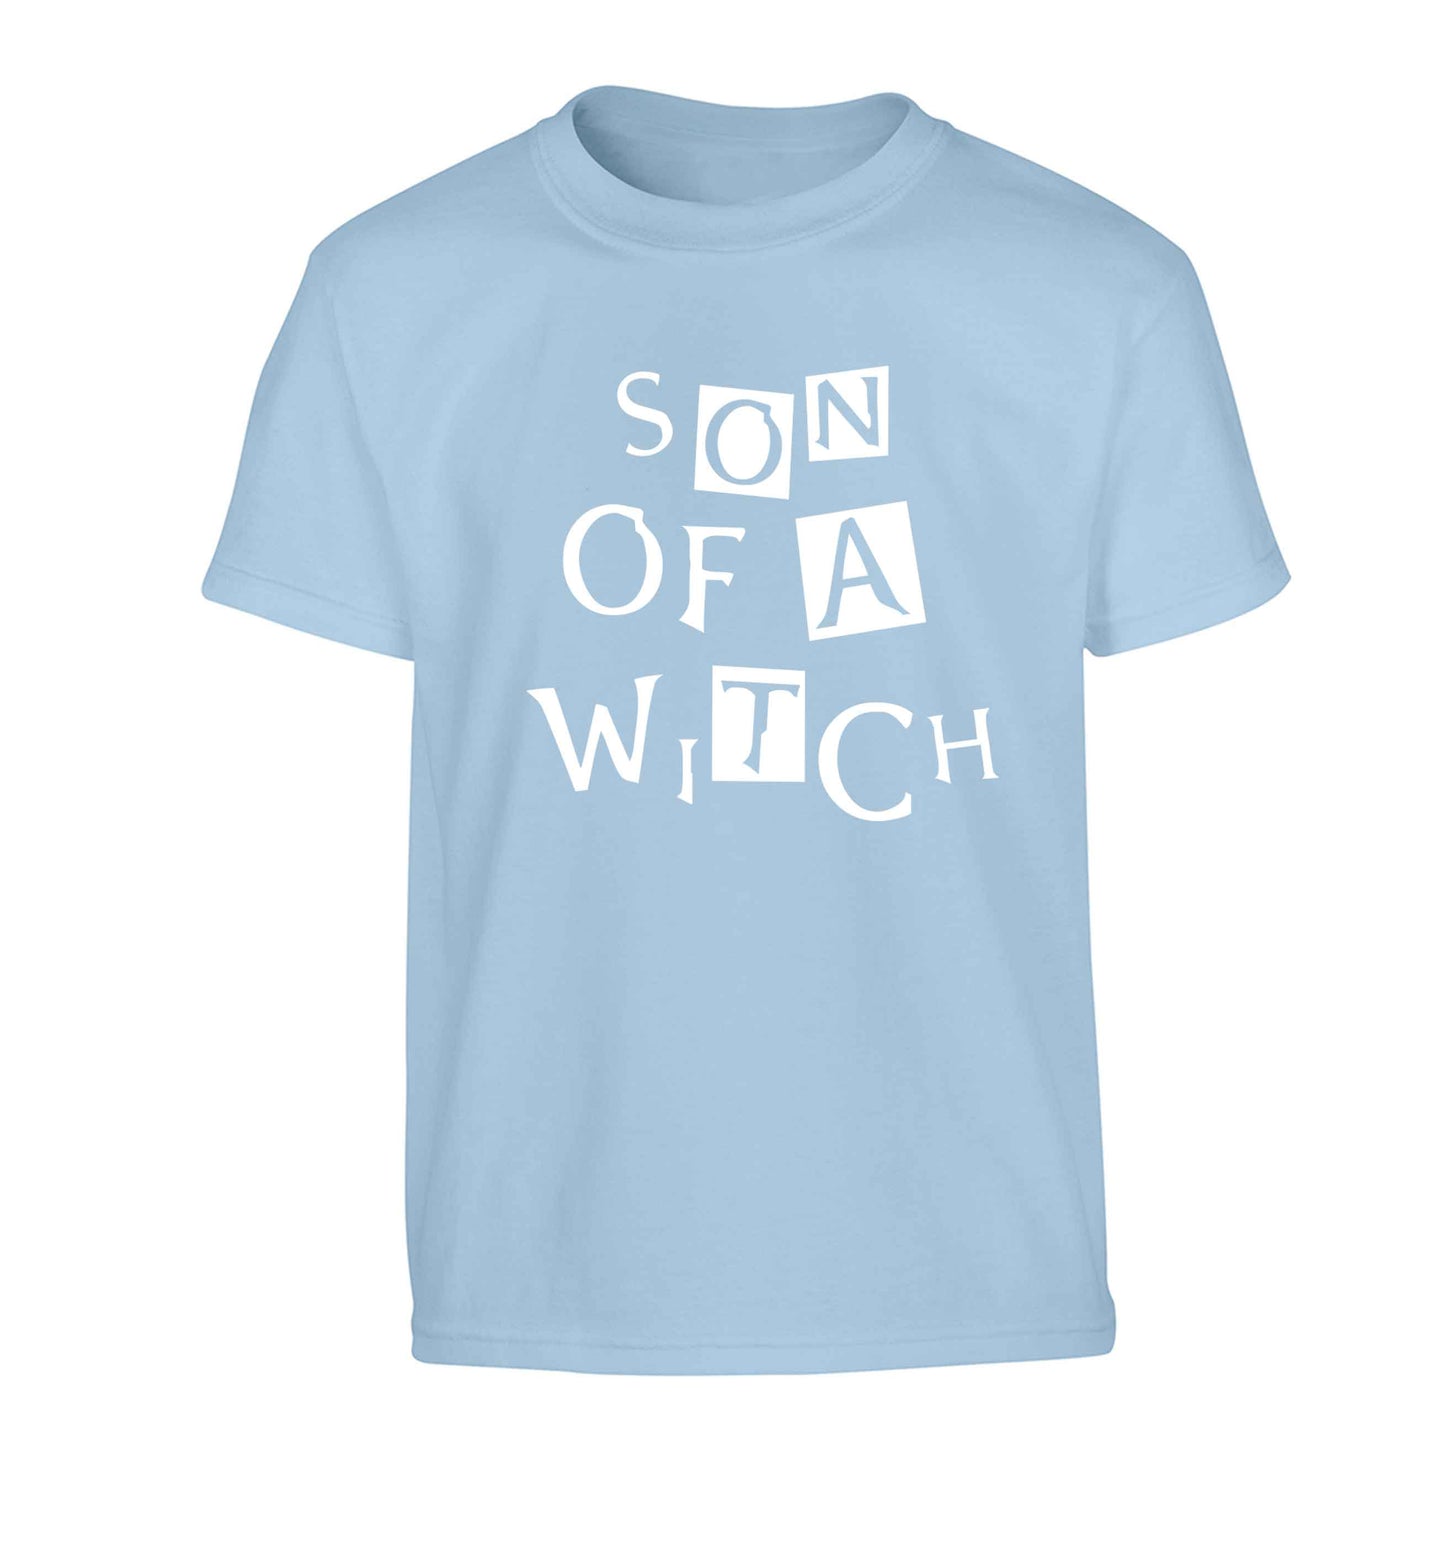 Son of a witch Children's light blue Tshirt 12-13 Years